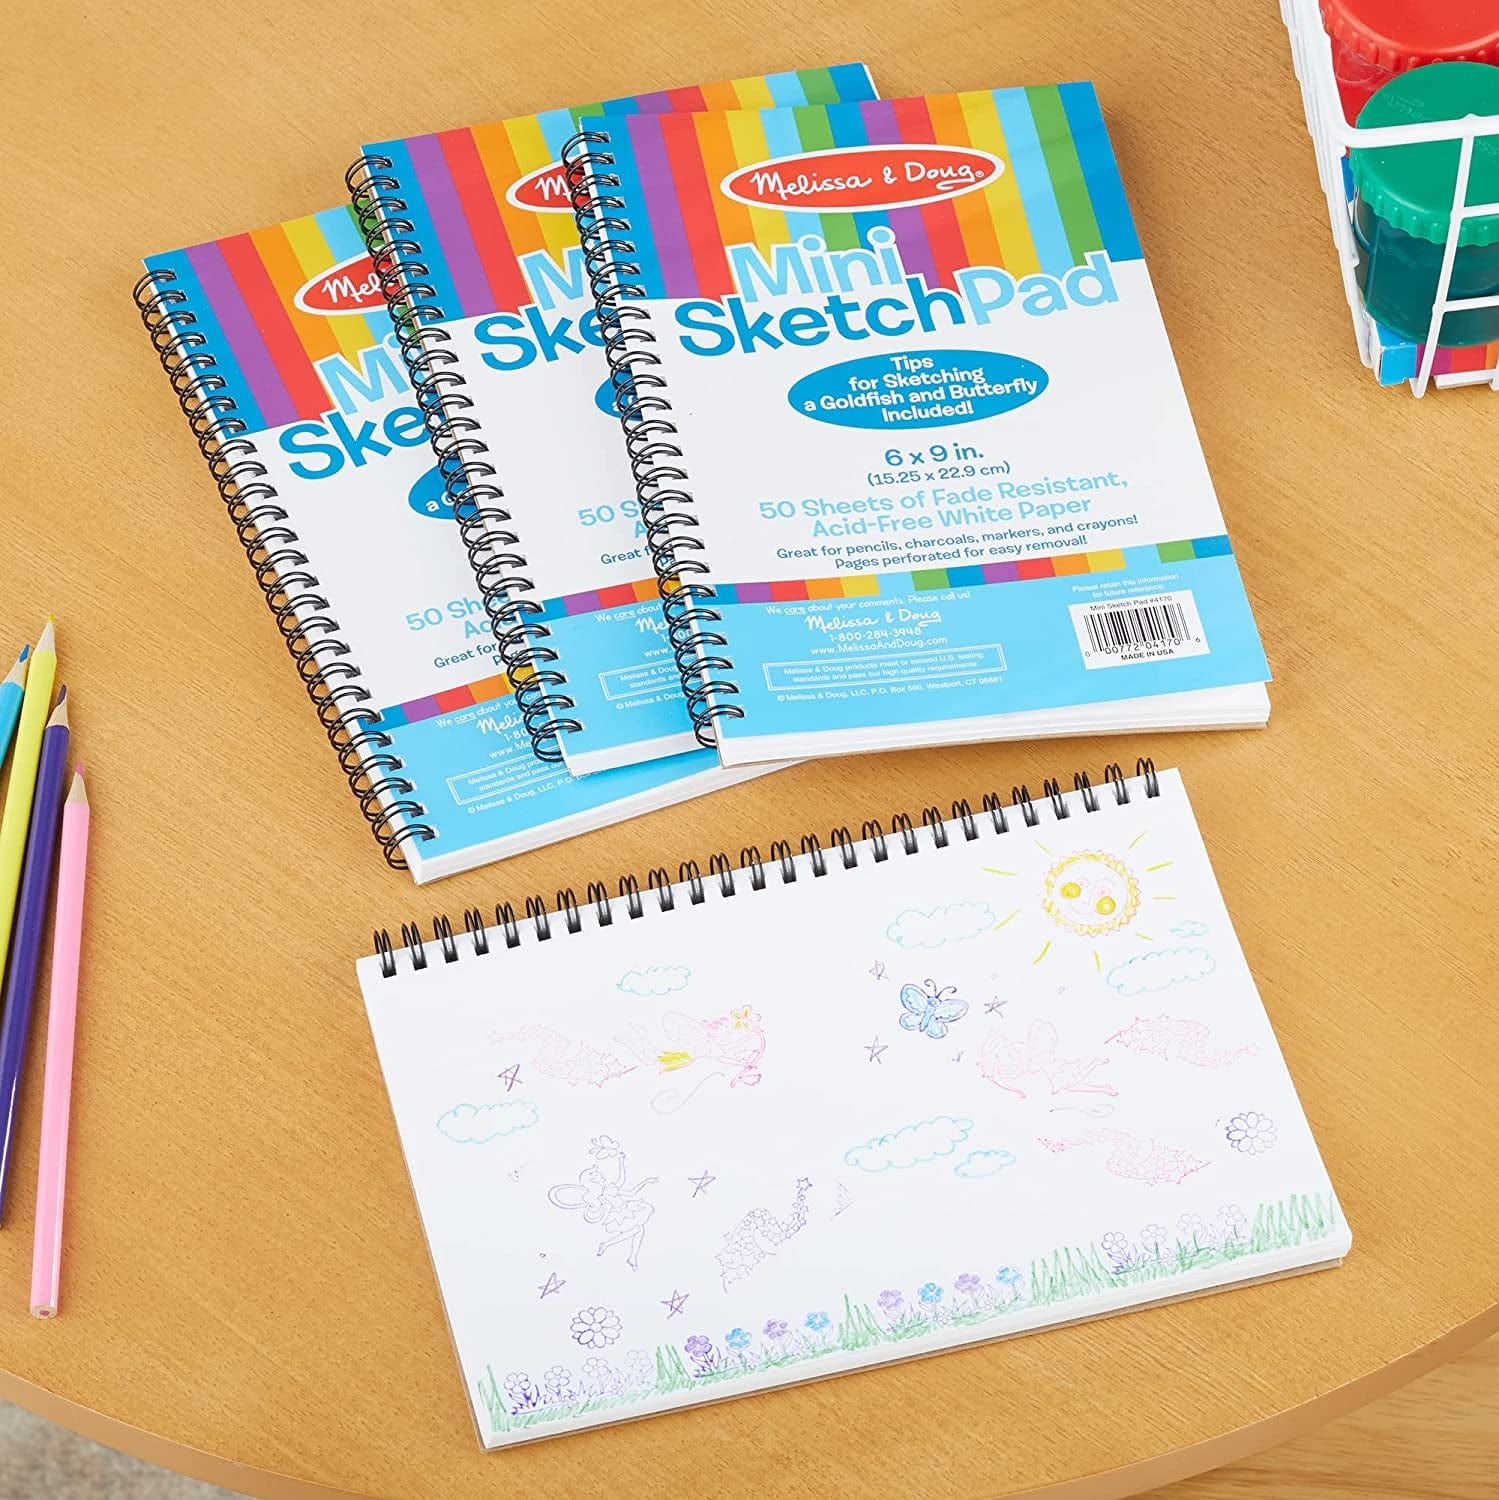 Melissa & Doug Mini-Sketch Spiral-Bound Pad (6 x 9 inches) - 4-Pack -  Sketch Book For Kids, Drawing Paper, Drawing And Coloring Pads, Art Supplies